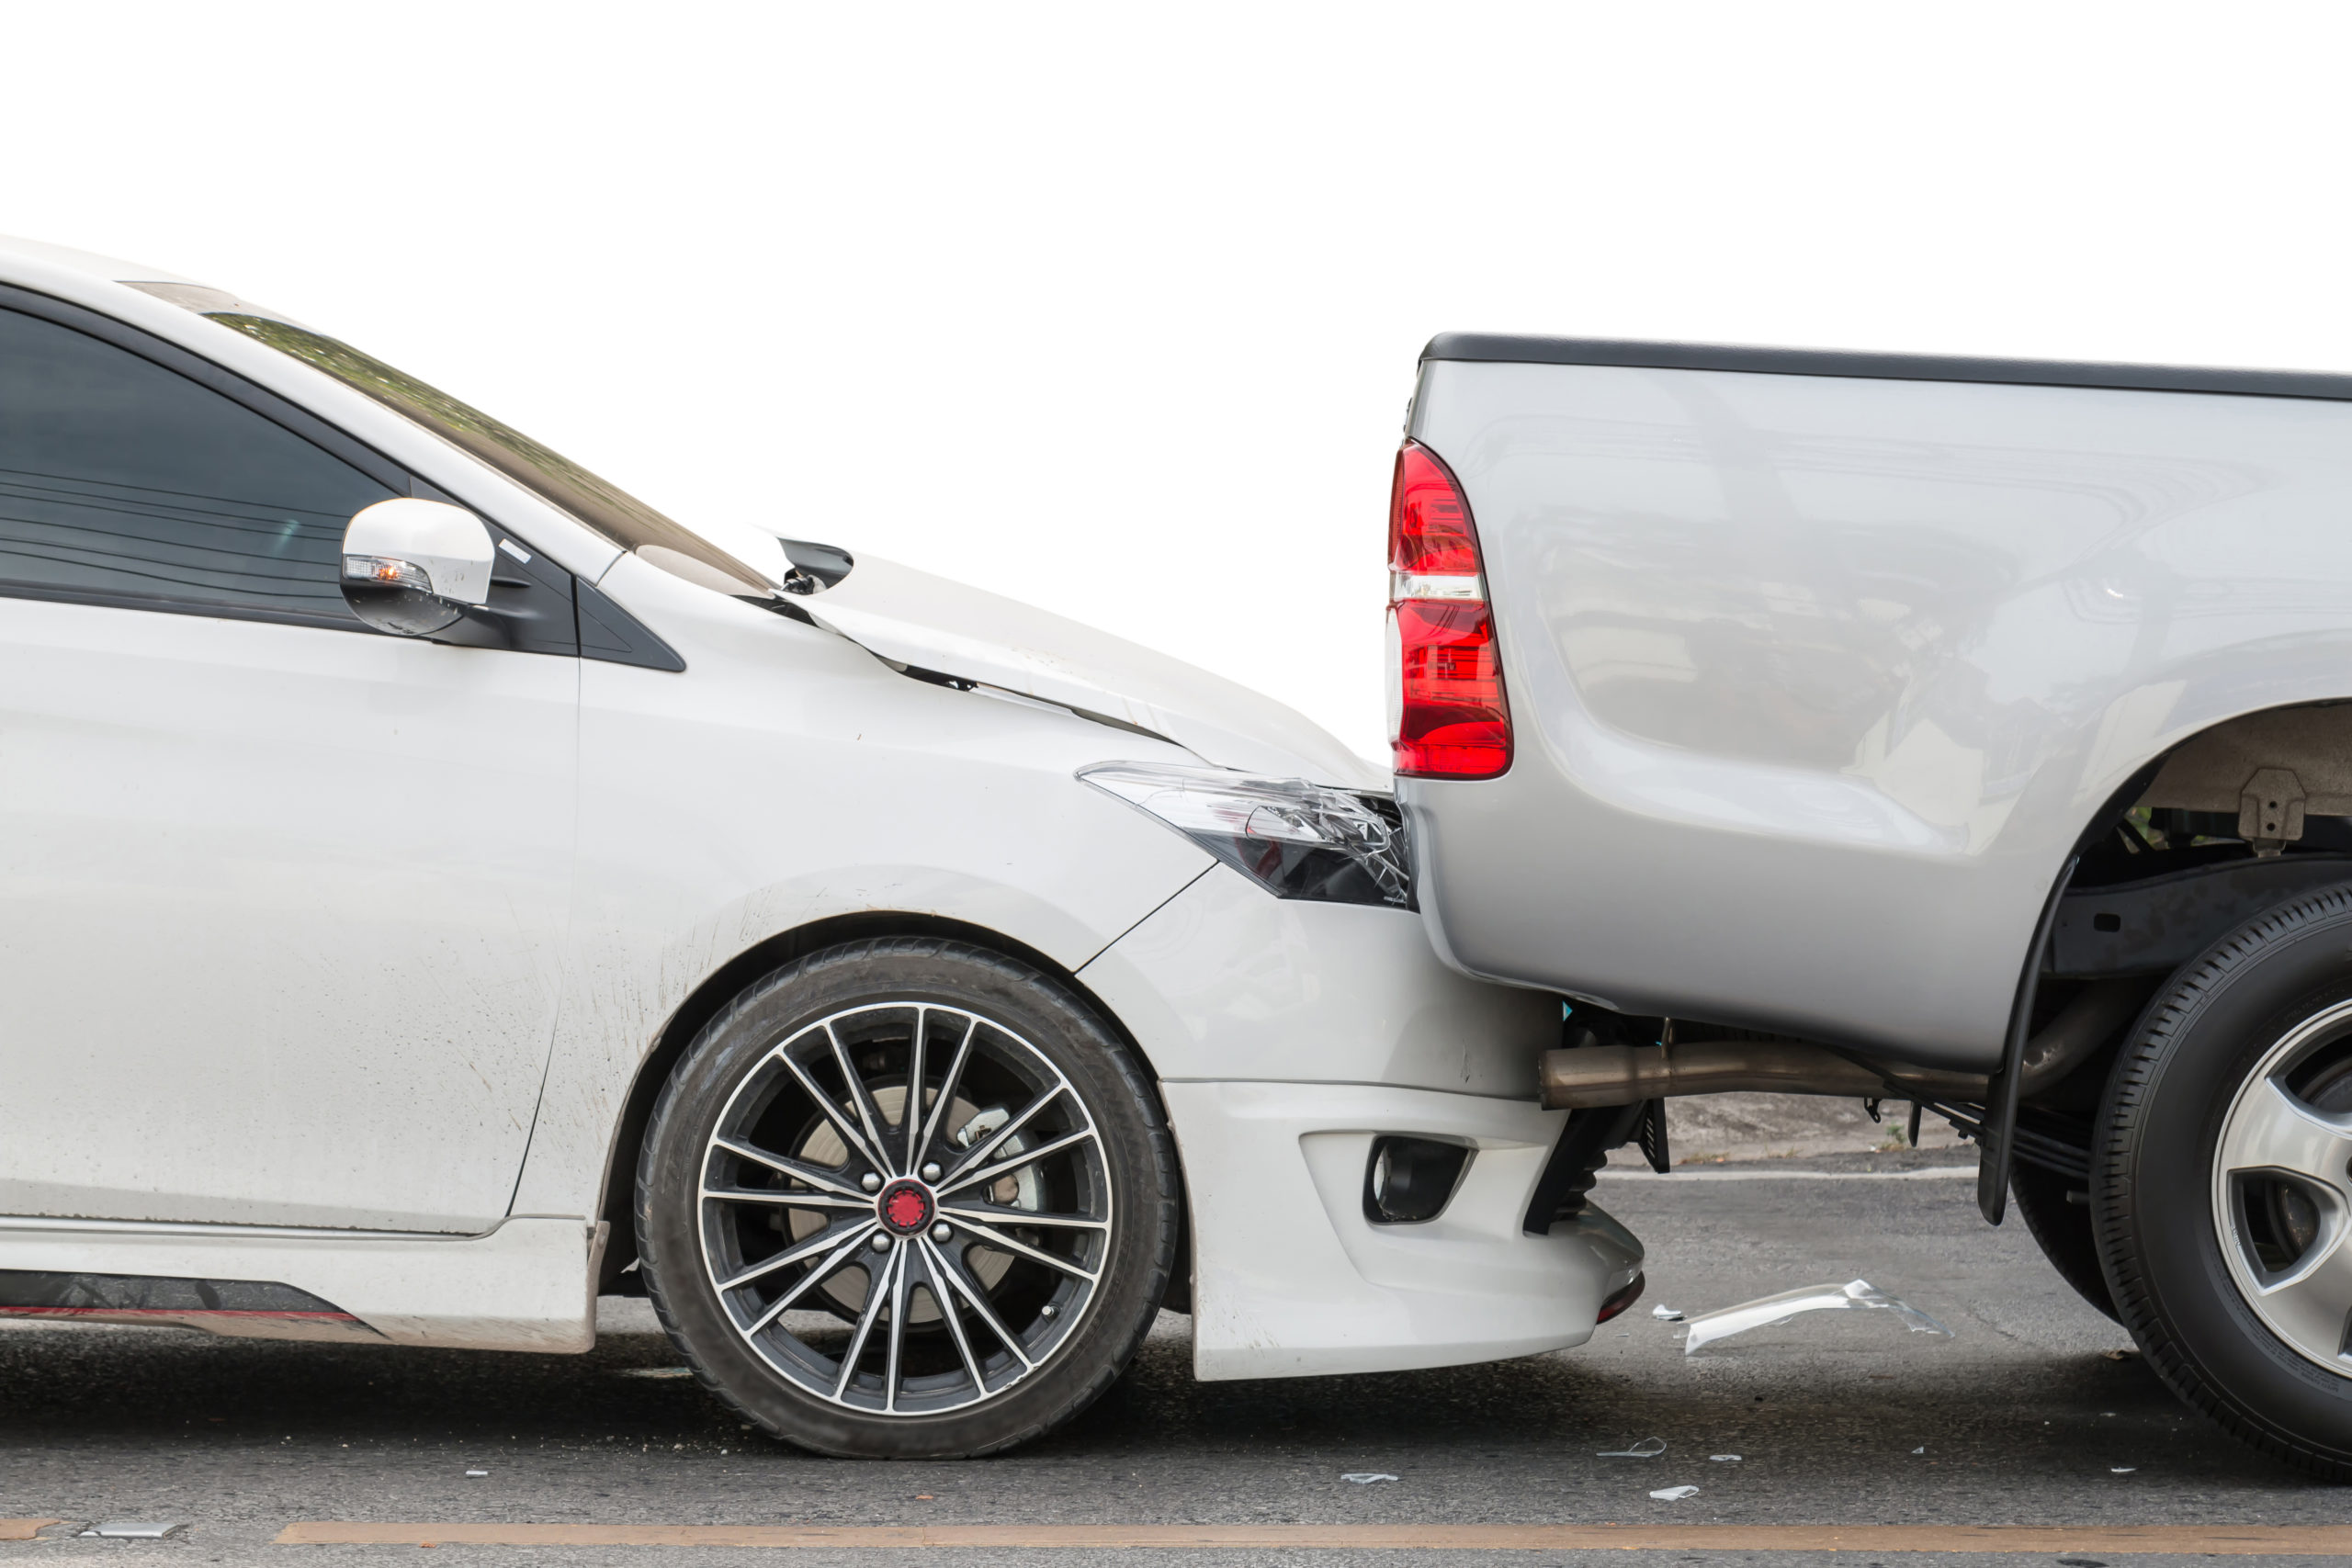 Most Common Causes of Car Accidents in California